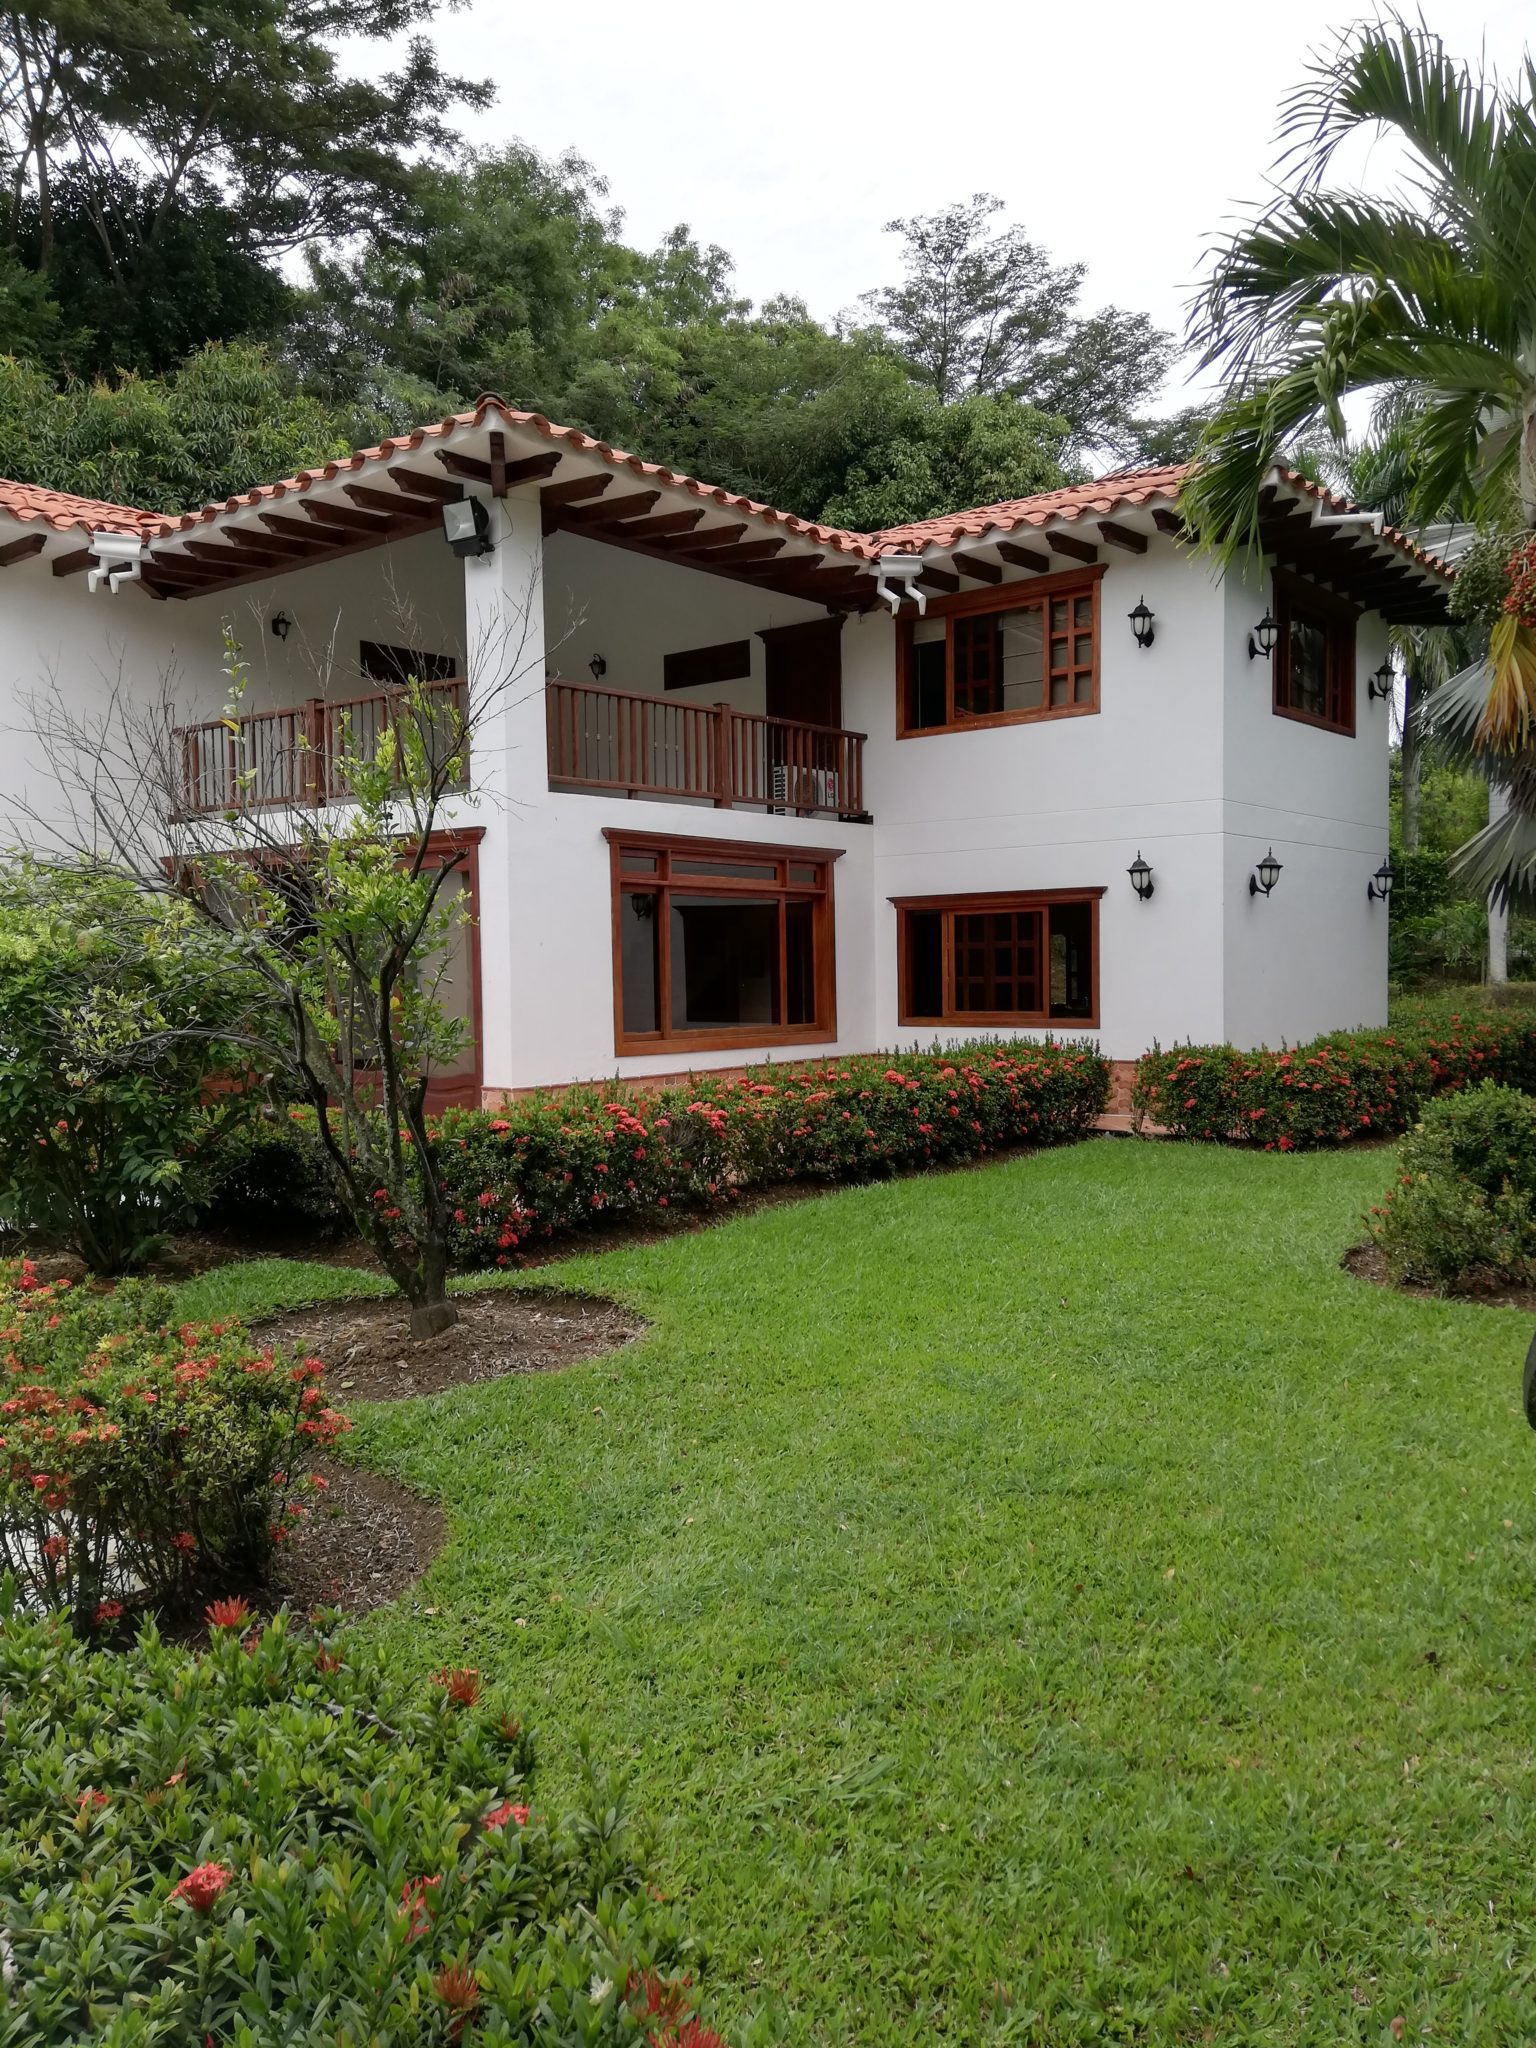 Two-Level 4,000 sq ft Home in Santa Fe de Antioquia with Outdoor Kitchen, Swimming Pool & Manicured Grounds